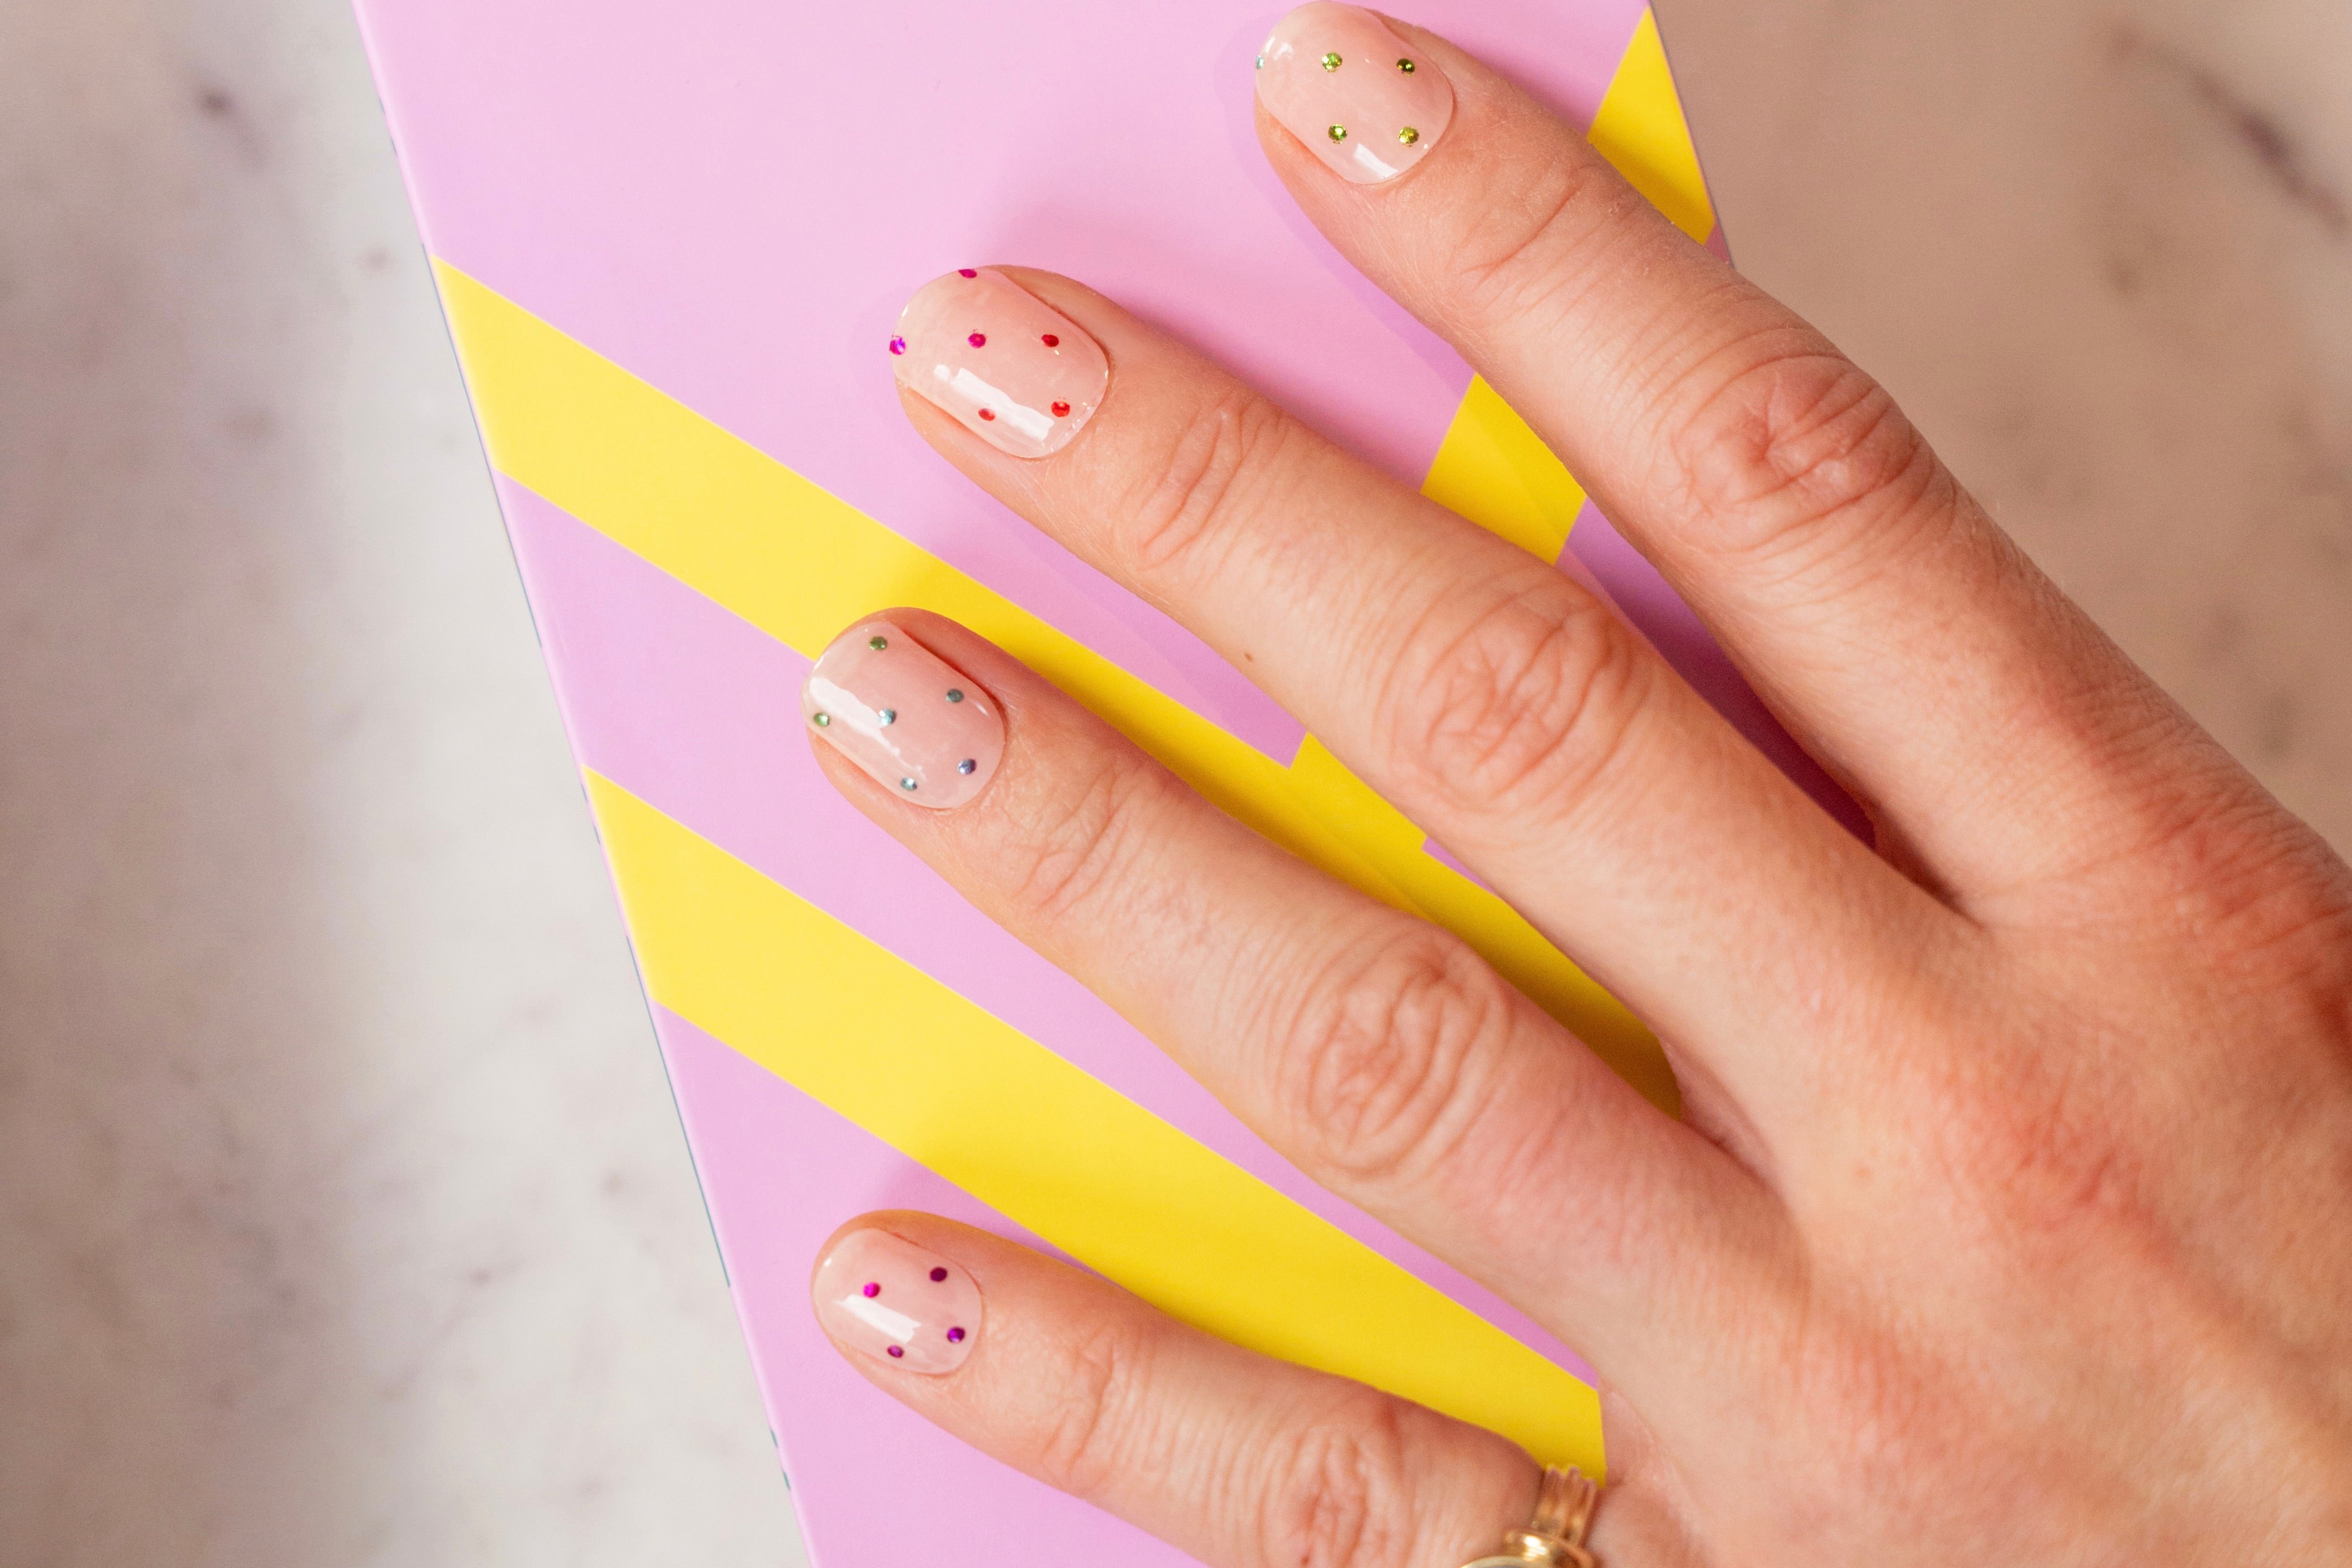 Disco Fever by Carolien Spoor Maniac Nails Gellak Stickers Nail Art colorful dots 